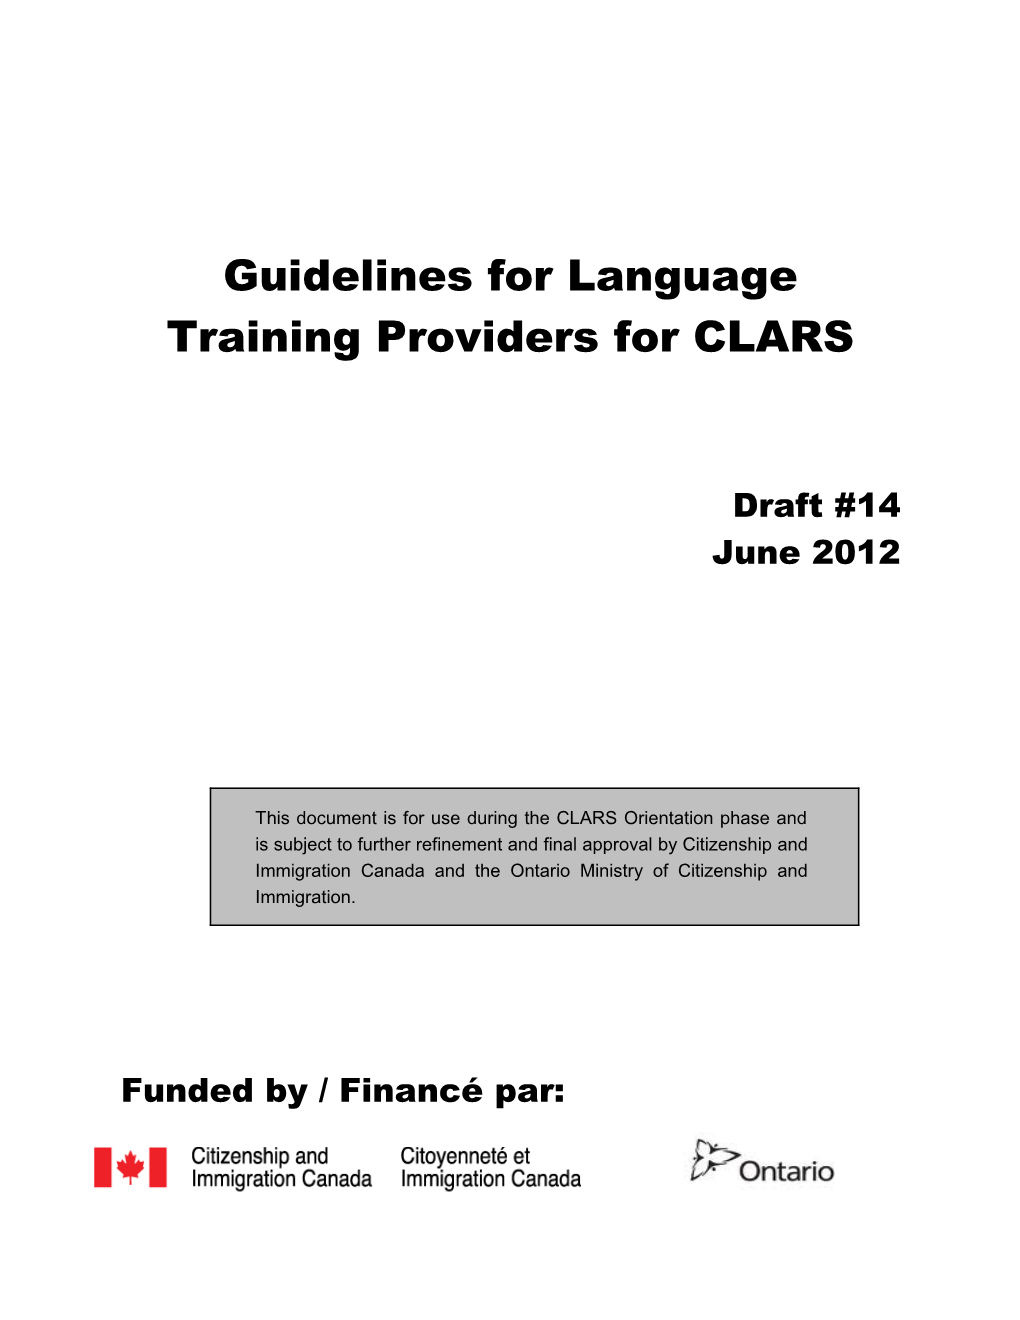 Guidelines for Language Training Providers